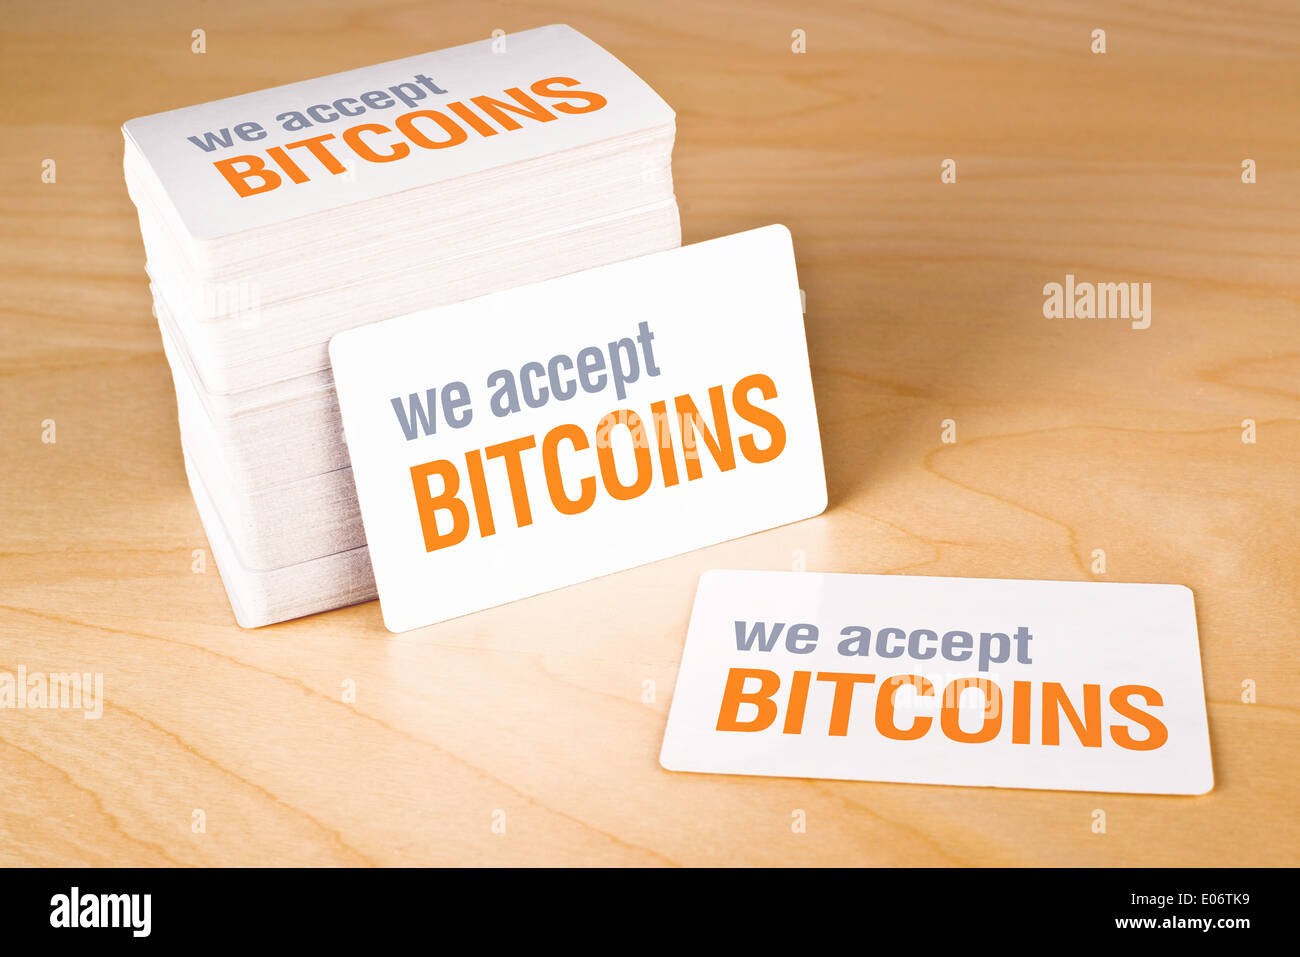 We accept bitcoins Business cards with rounded corners. Stack of blank horizontal business cards propped up another. Stock Photo